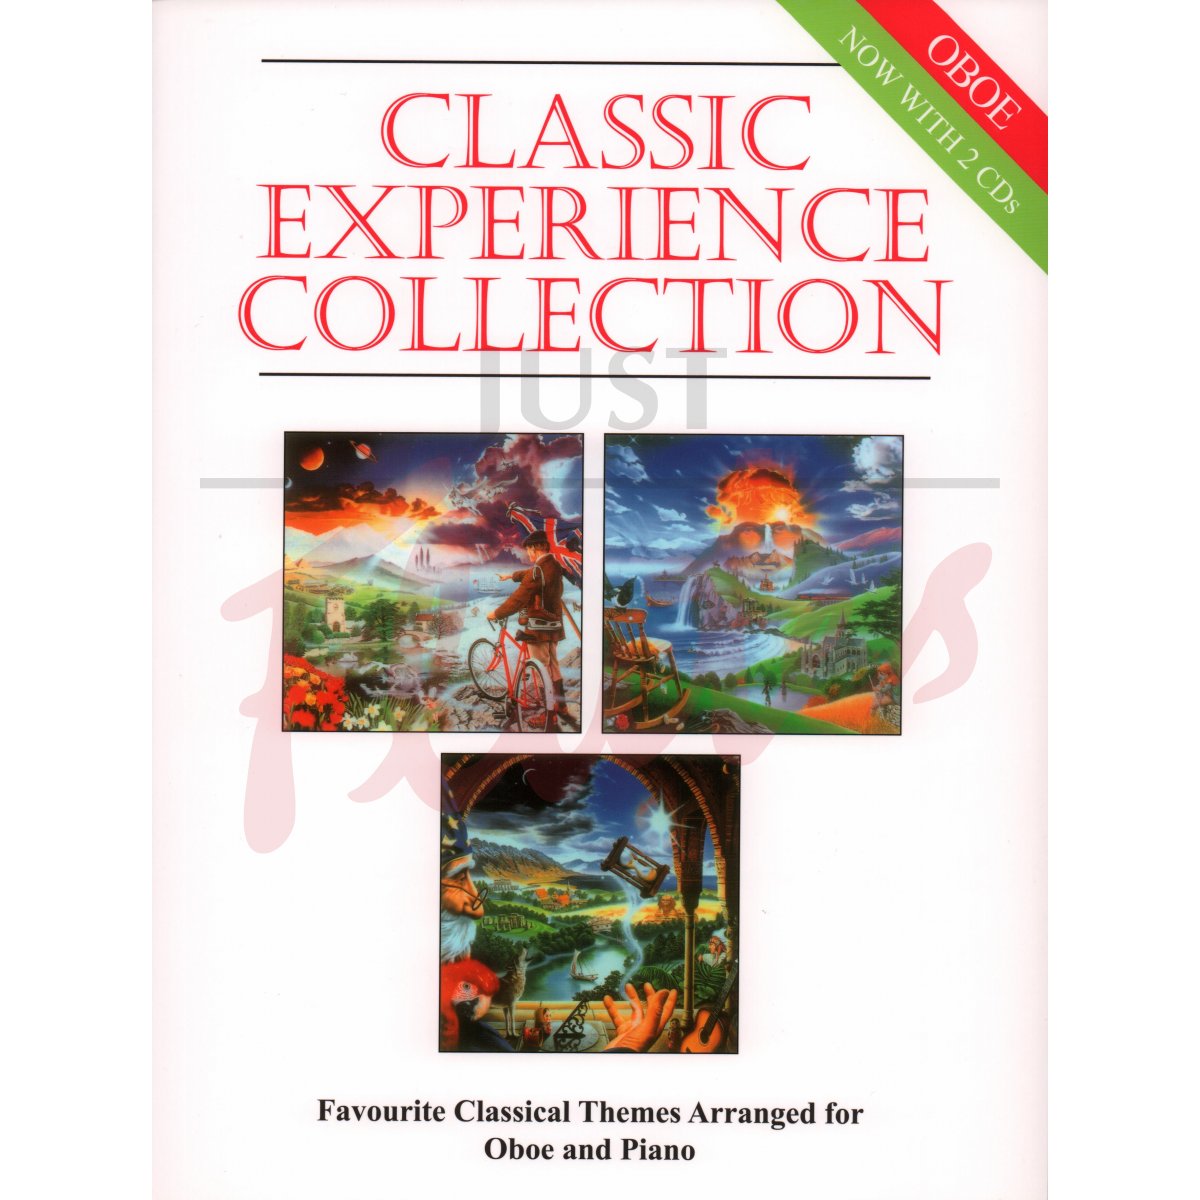 Classic Experience Collection for Oboe and Piano